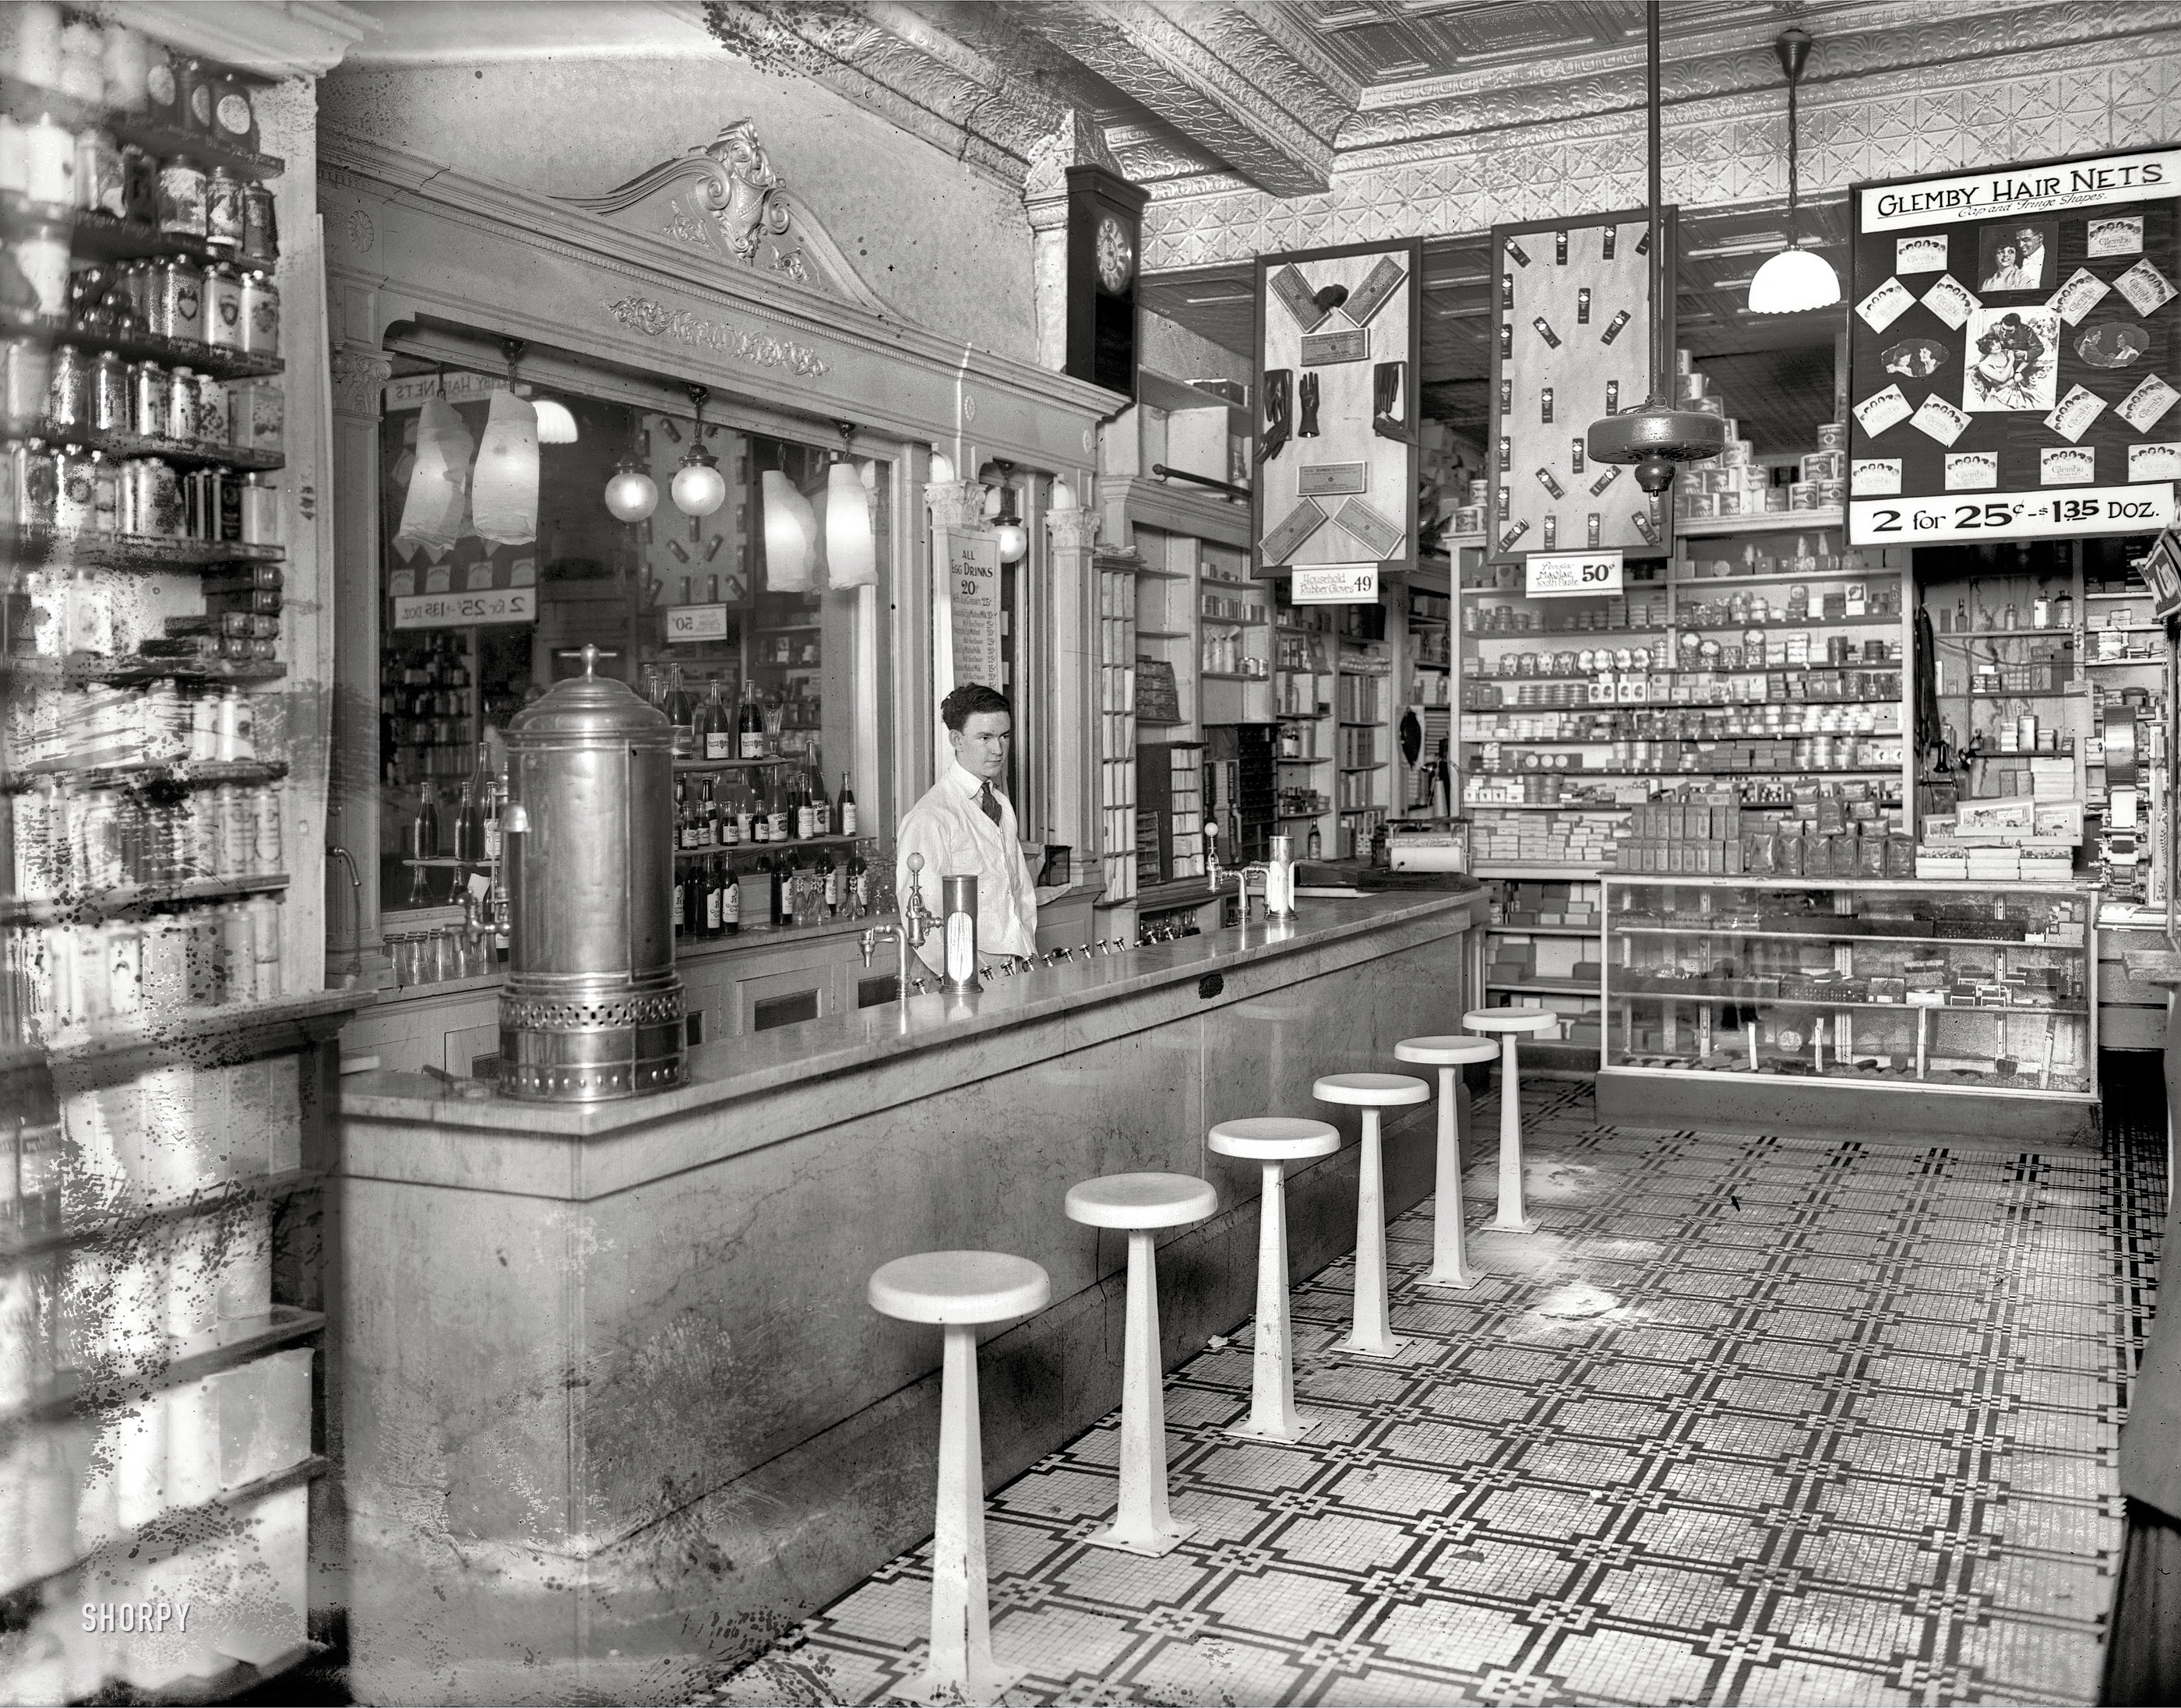 Washington, D.C., circa 1920. "People's Drug Store, 14th & U Streets, interior."

Is flyaway hair holding you back? Keeping you home those evenings your friends are out having a gay night on the town? Those loose strands may be a symptom of deeper ills -- malnutrition the consequence of egg-based-beverage deficiency, perhaps aggravated by tooth-brushing with an inferior dentifrice. Ladies, am I talking to you? Then come see this man. He is the gatekeeper to hair-nets, toothpaste, Egg Drinks -- and so much more. (Rubber gloves, for one thing, but that's another story.) The day you pick up a Glemby Hair Net -- or two, or hell, why not a dozen -- is the first day of the rest of your life! View full size.